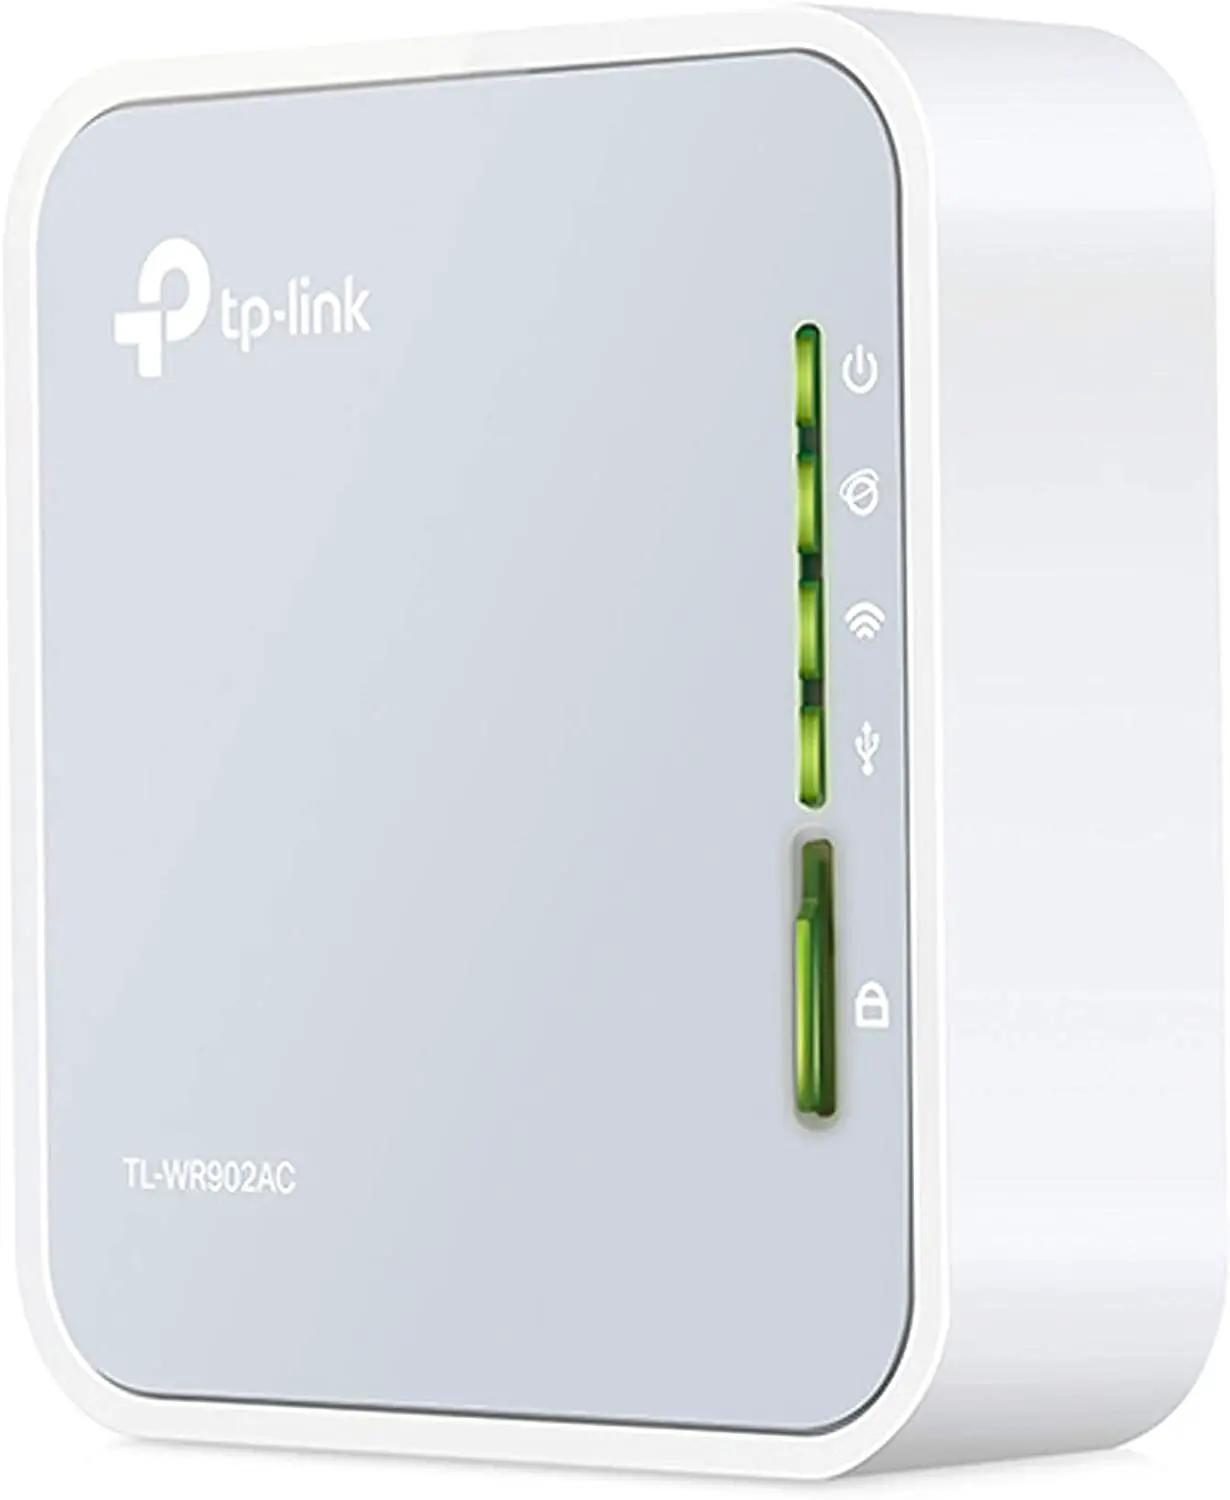 TP-Link AC 750 Wireless Portable Nano Travel Router